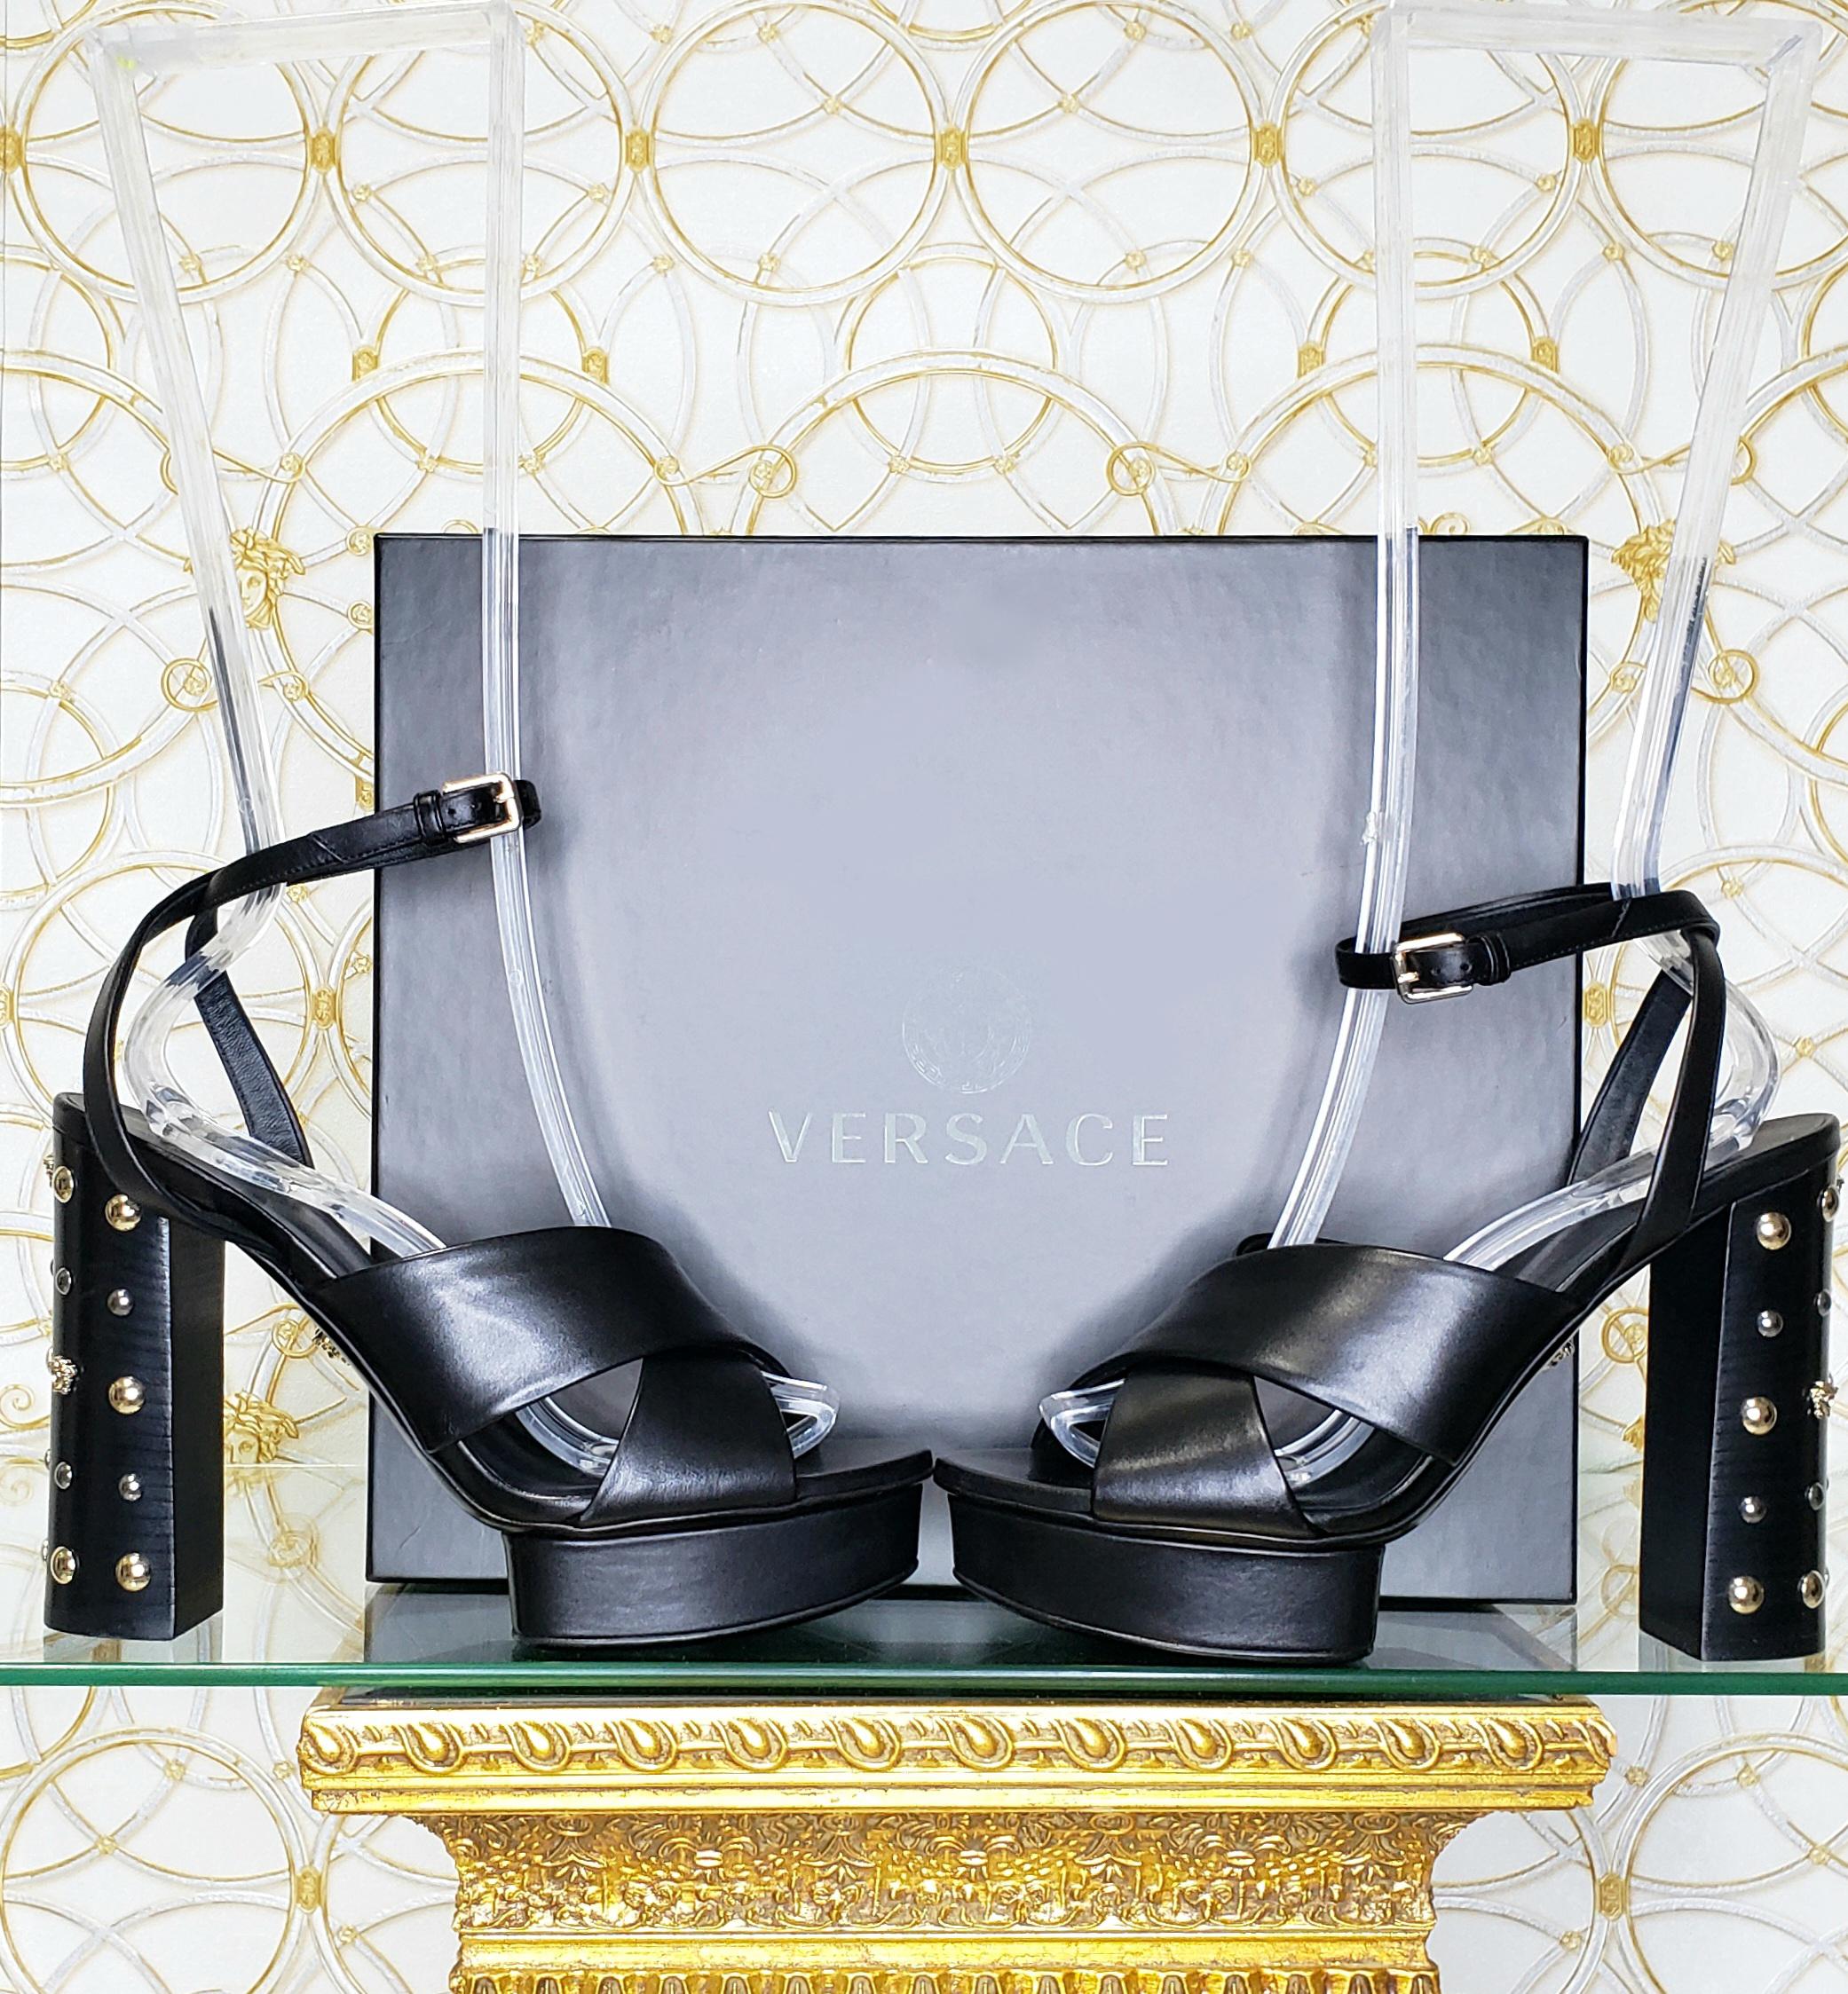 VERSACE

Black leather sandals shoes with gold and silver studs and famous Medusa Studs

DETAILS:

Open toe and heel

Buckling ankle strap closure

Content: 100% Leather (Lining and Sole) 


   Color: Black

Heel: at around 5